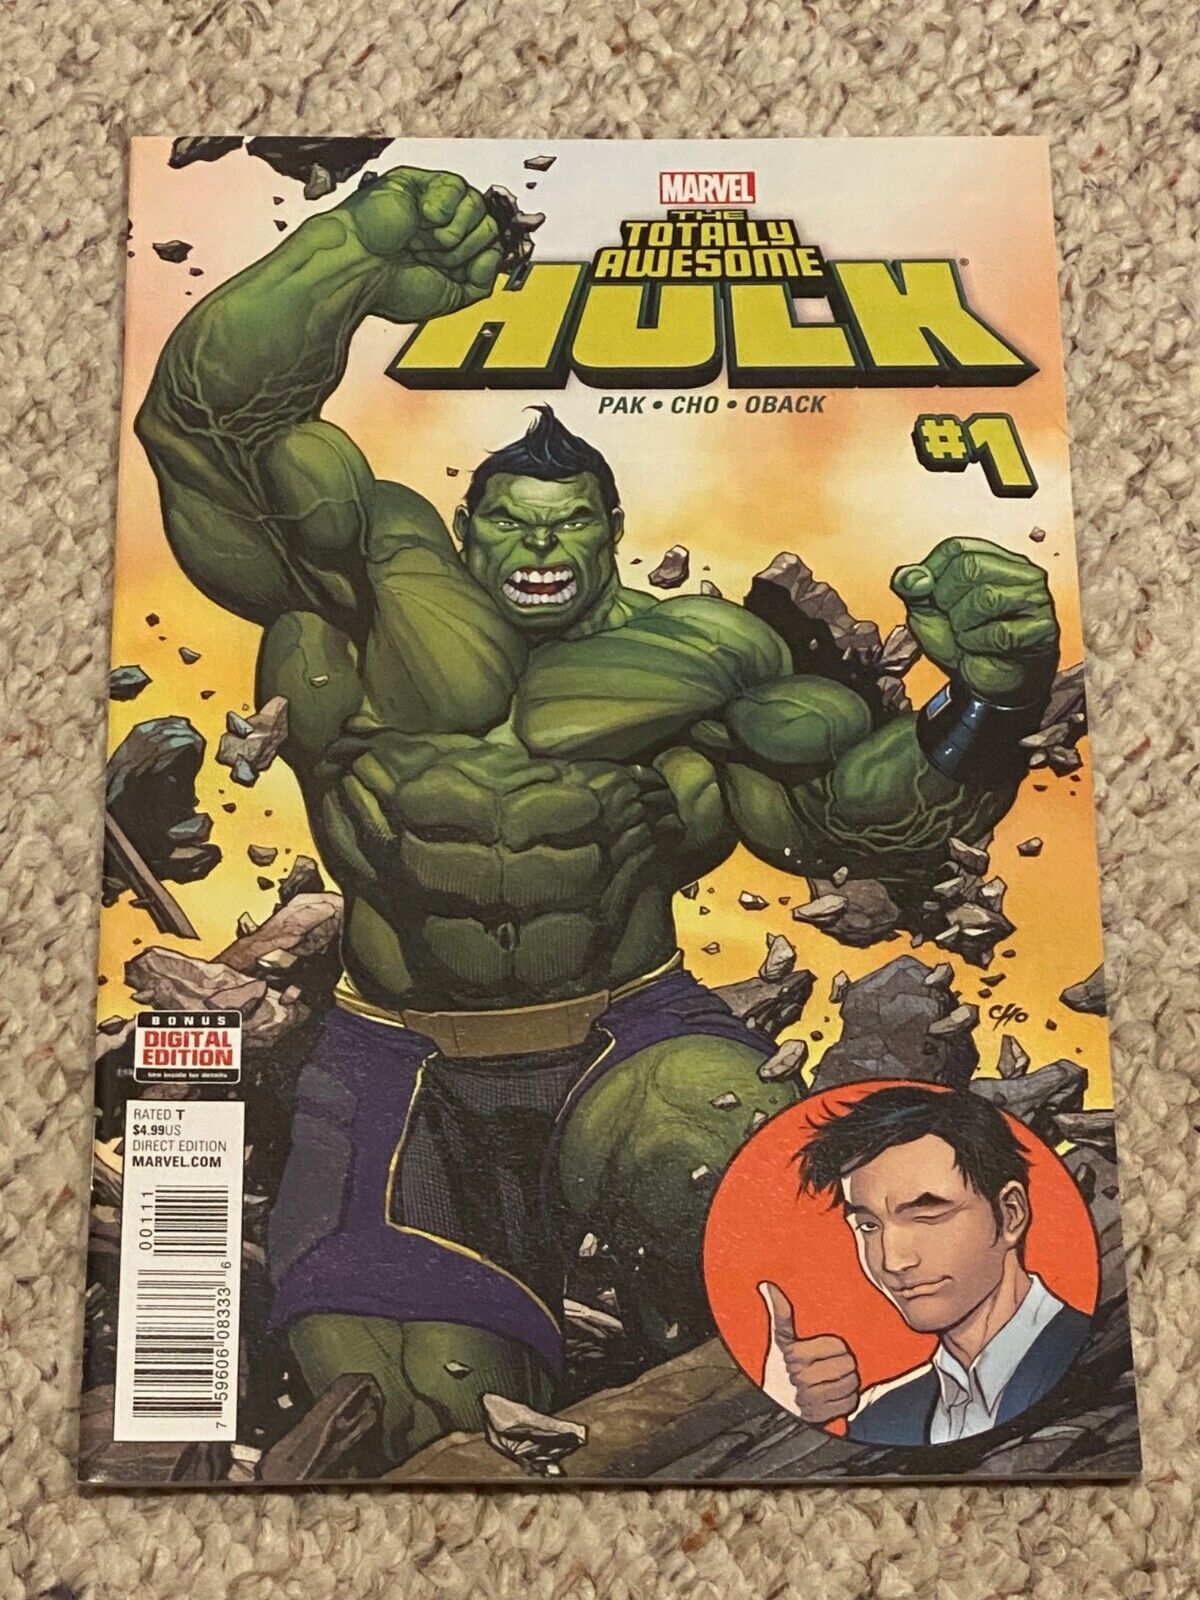 THE TOTALLY AWESOME HULK #1 BY FRANK CHO